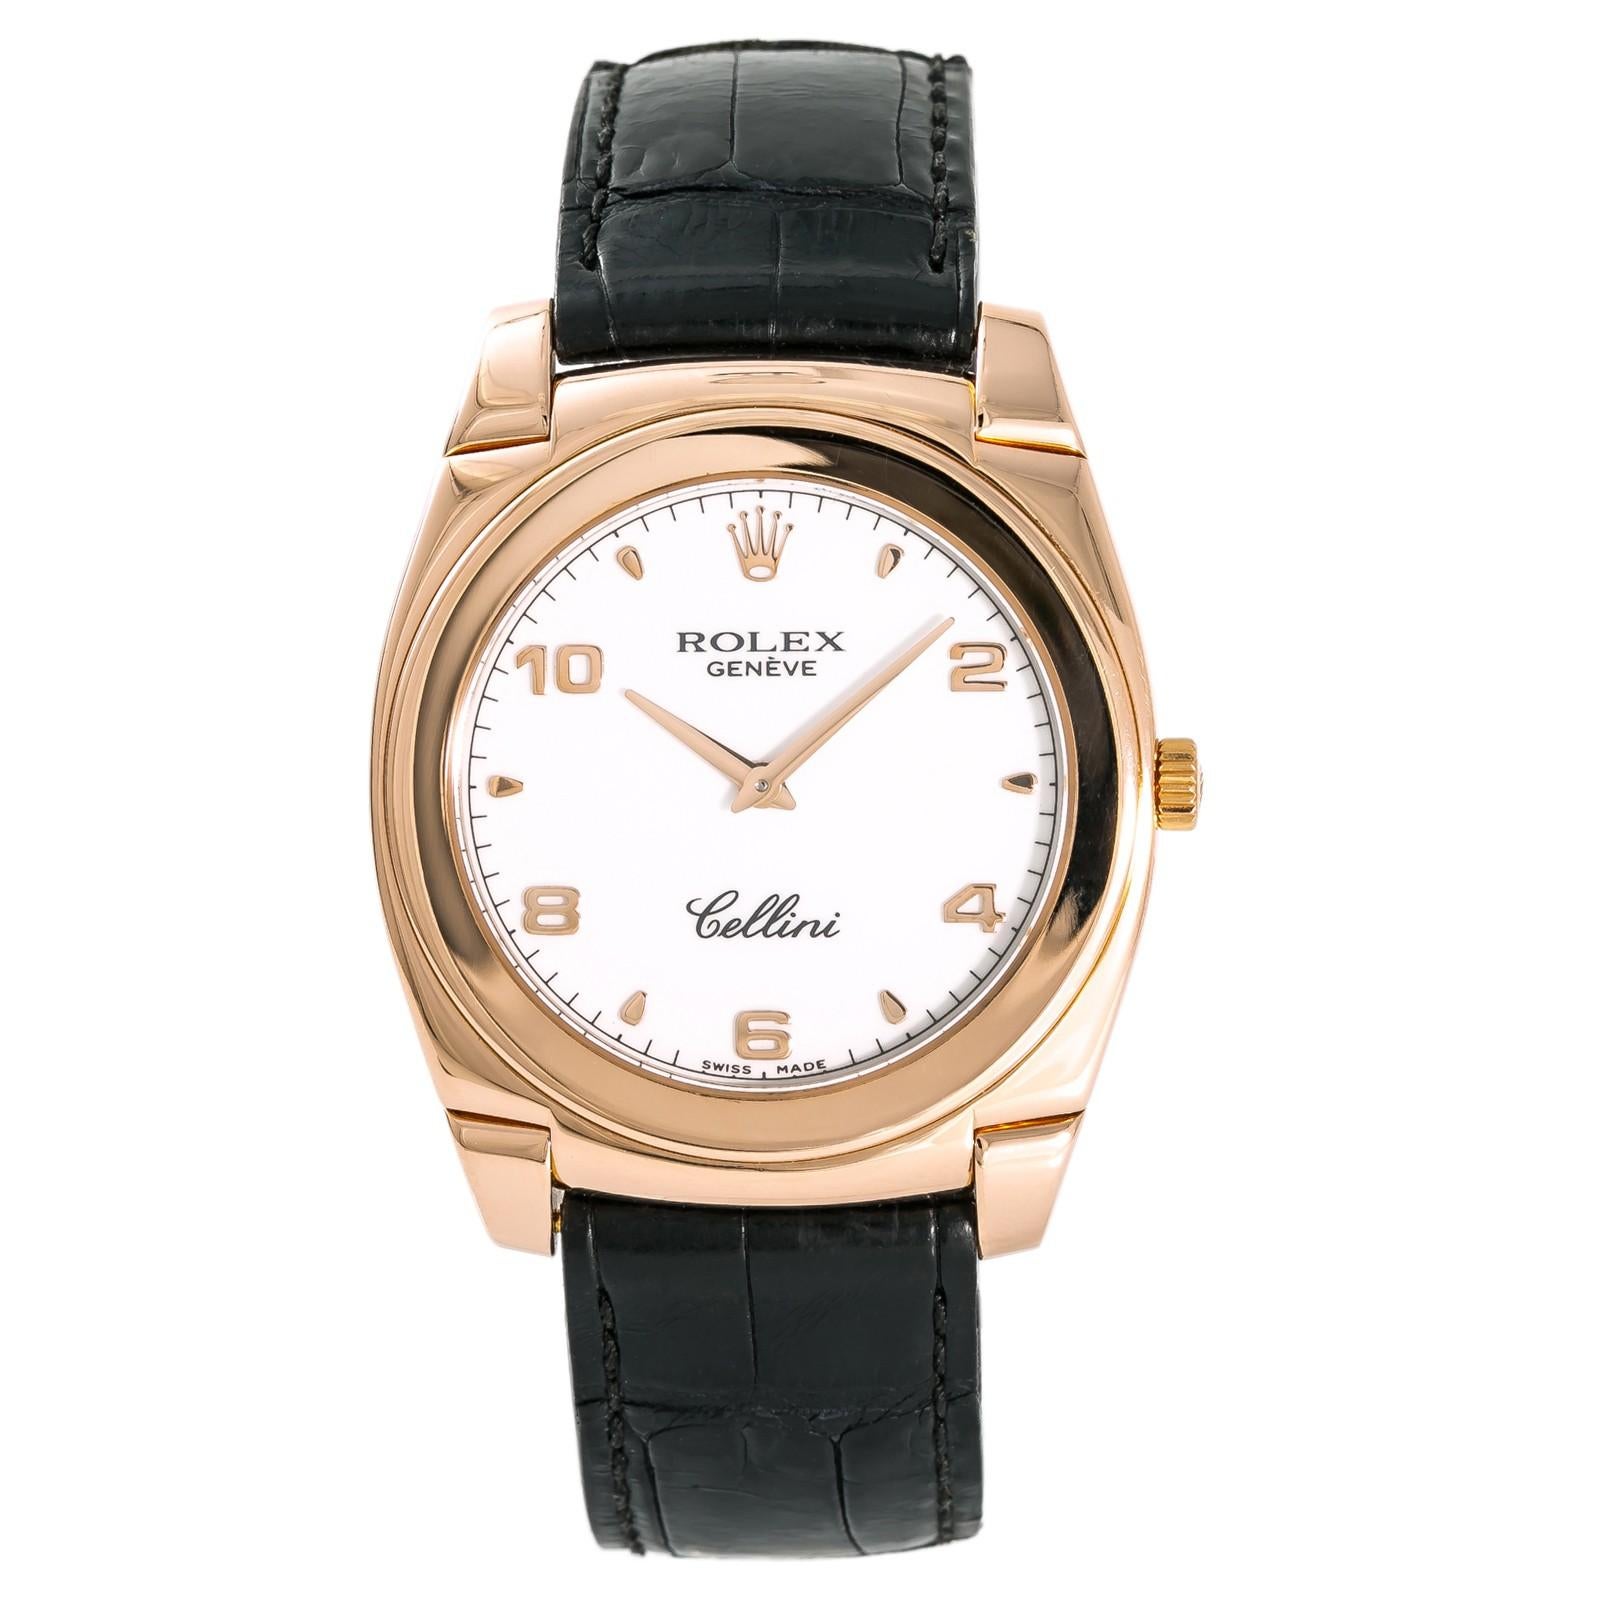 Rolex Cellini 5330, White Dial Certified Authentic For Sale